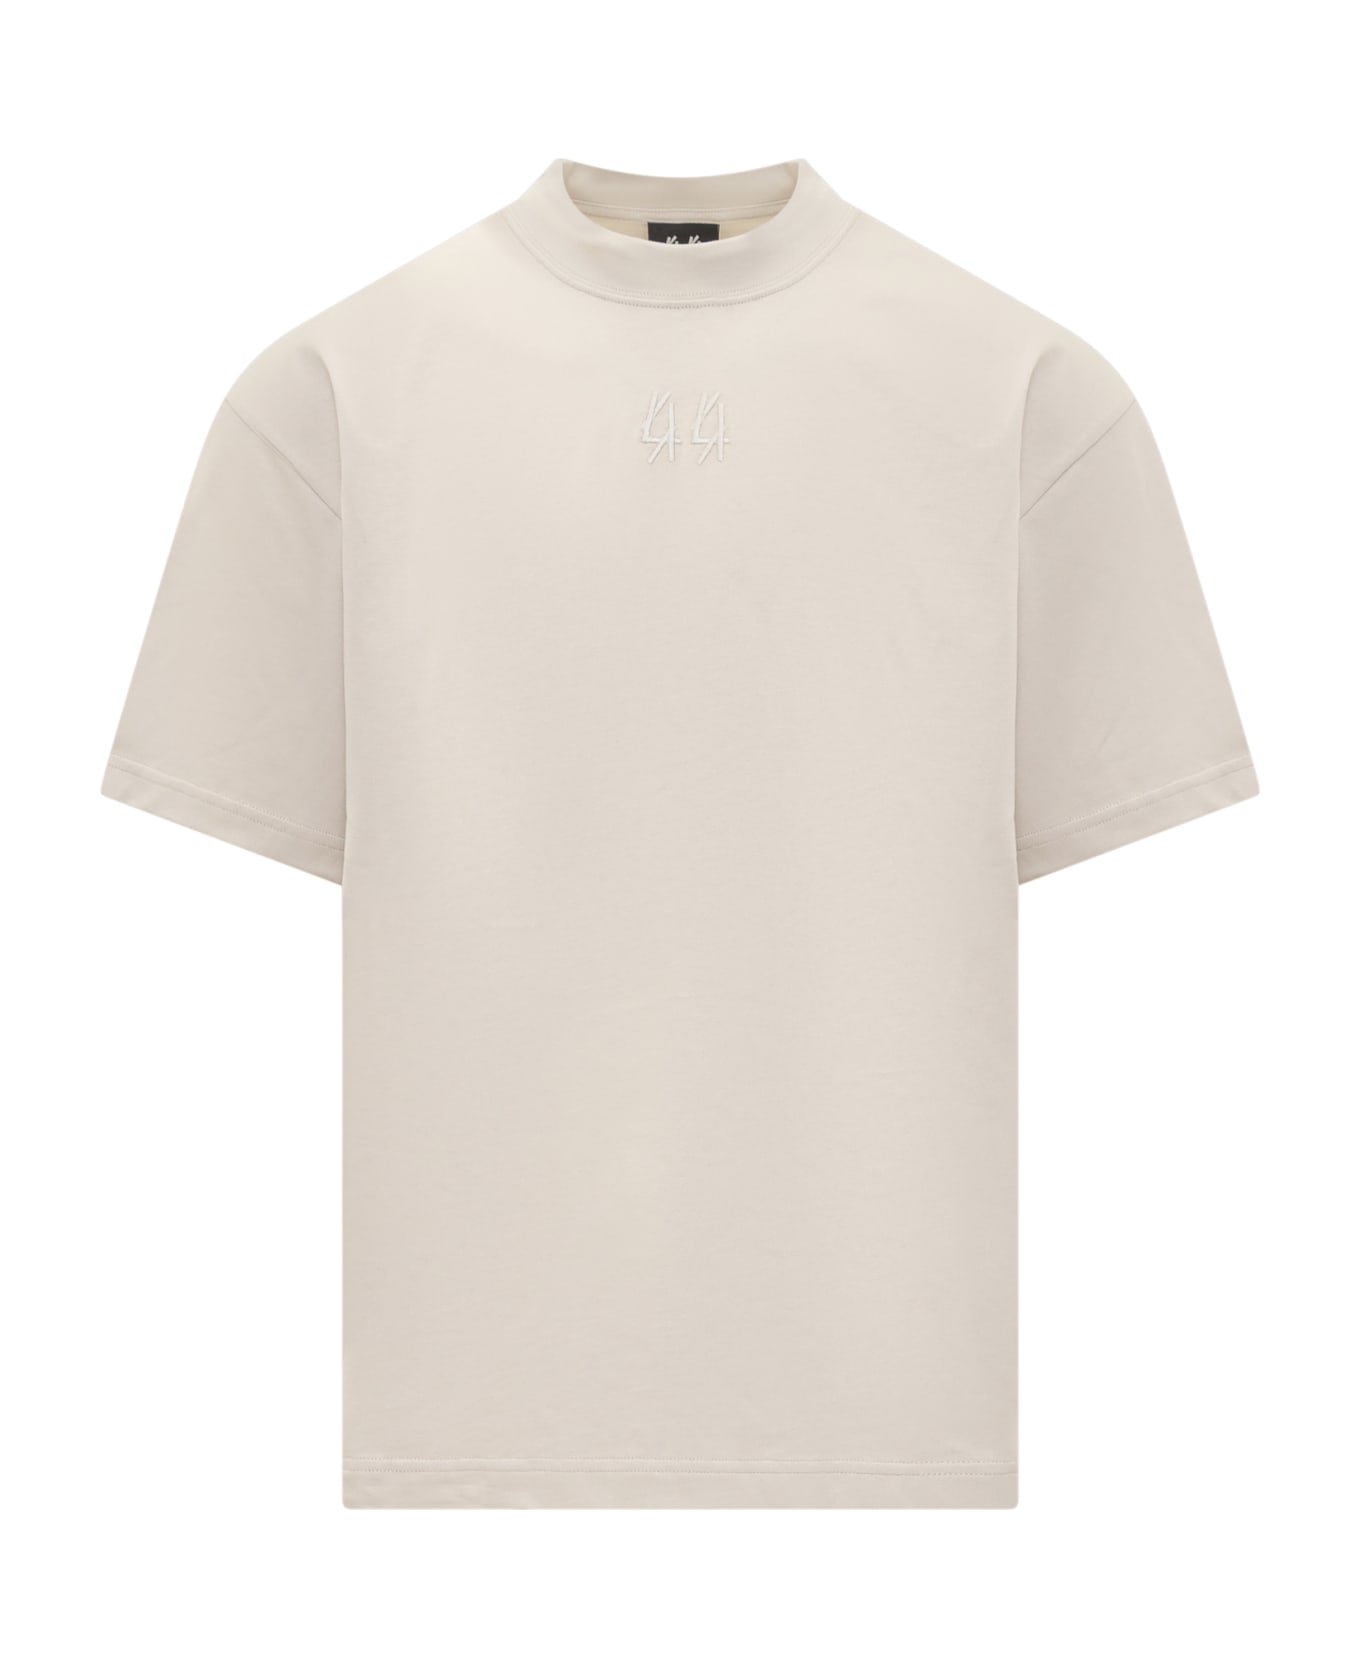 44 Label Group T-shirt With Logo T-Shirt - DIRTY WHITE